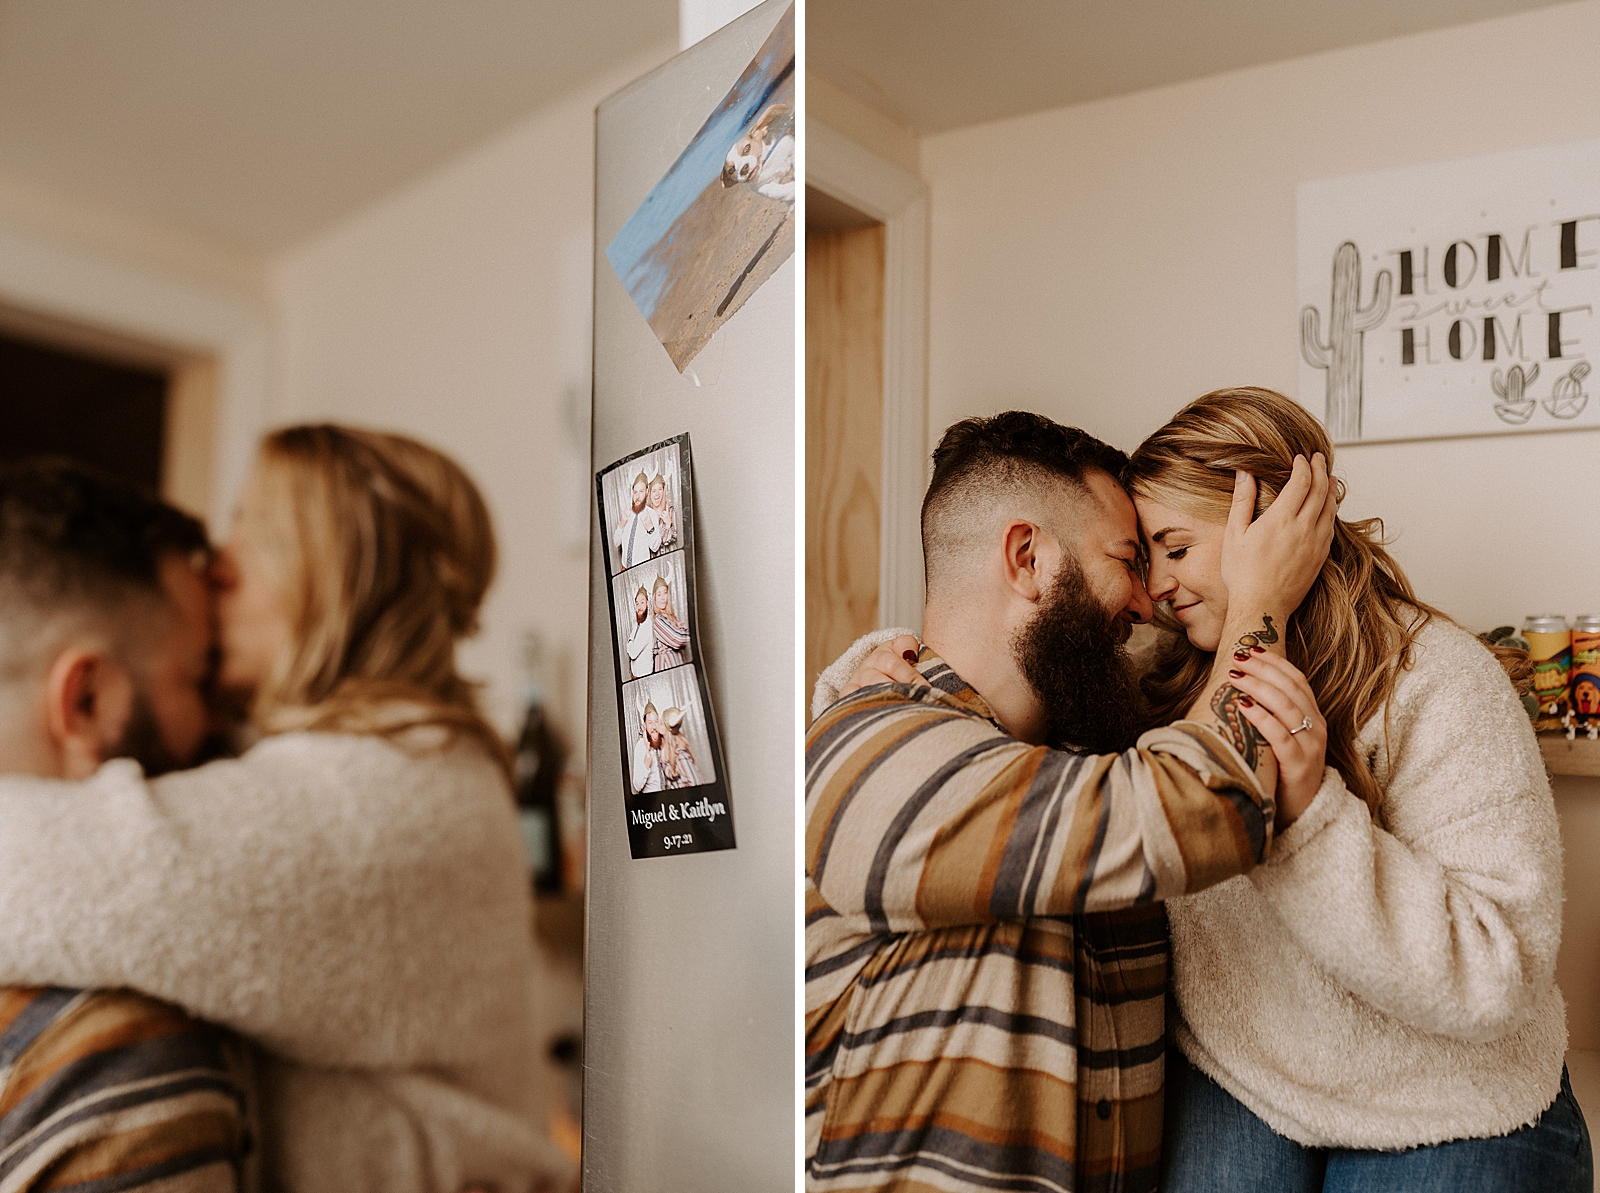 blurry woman kissing man on forehead and nuzzling heads